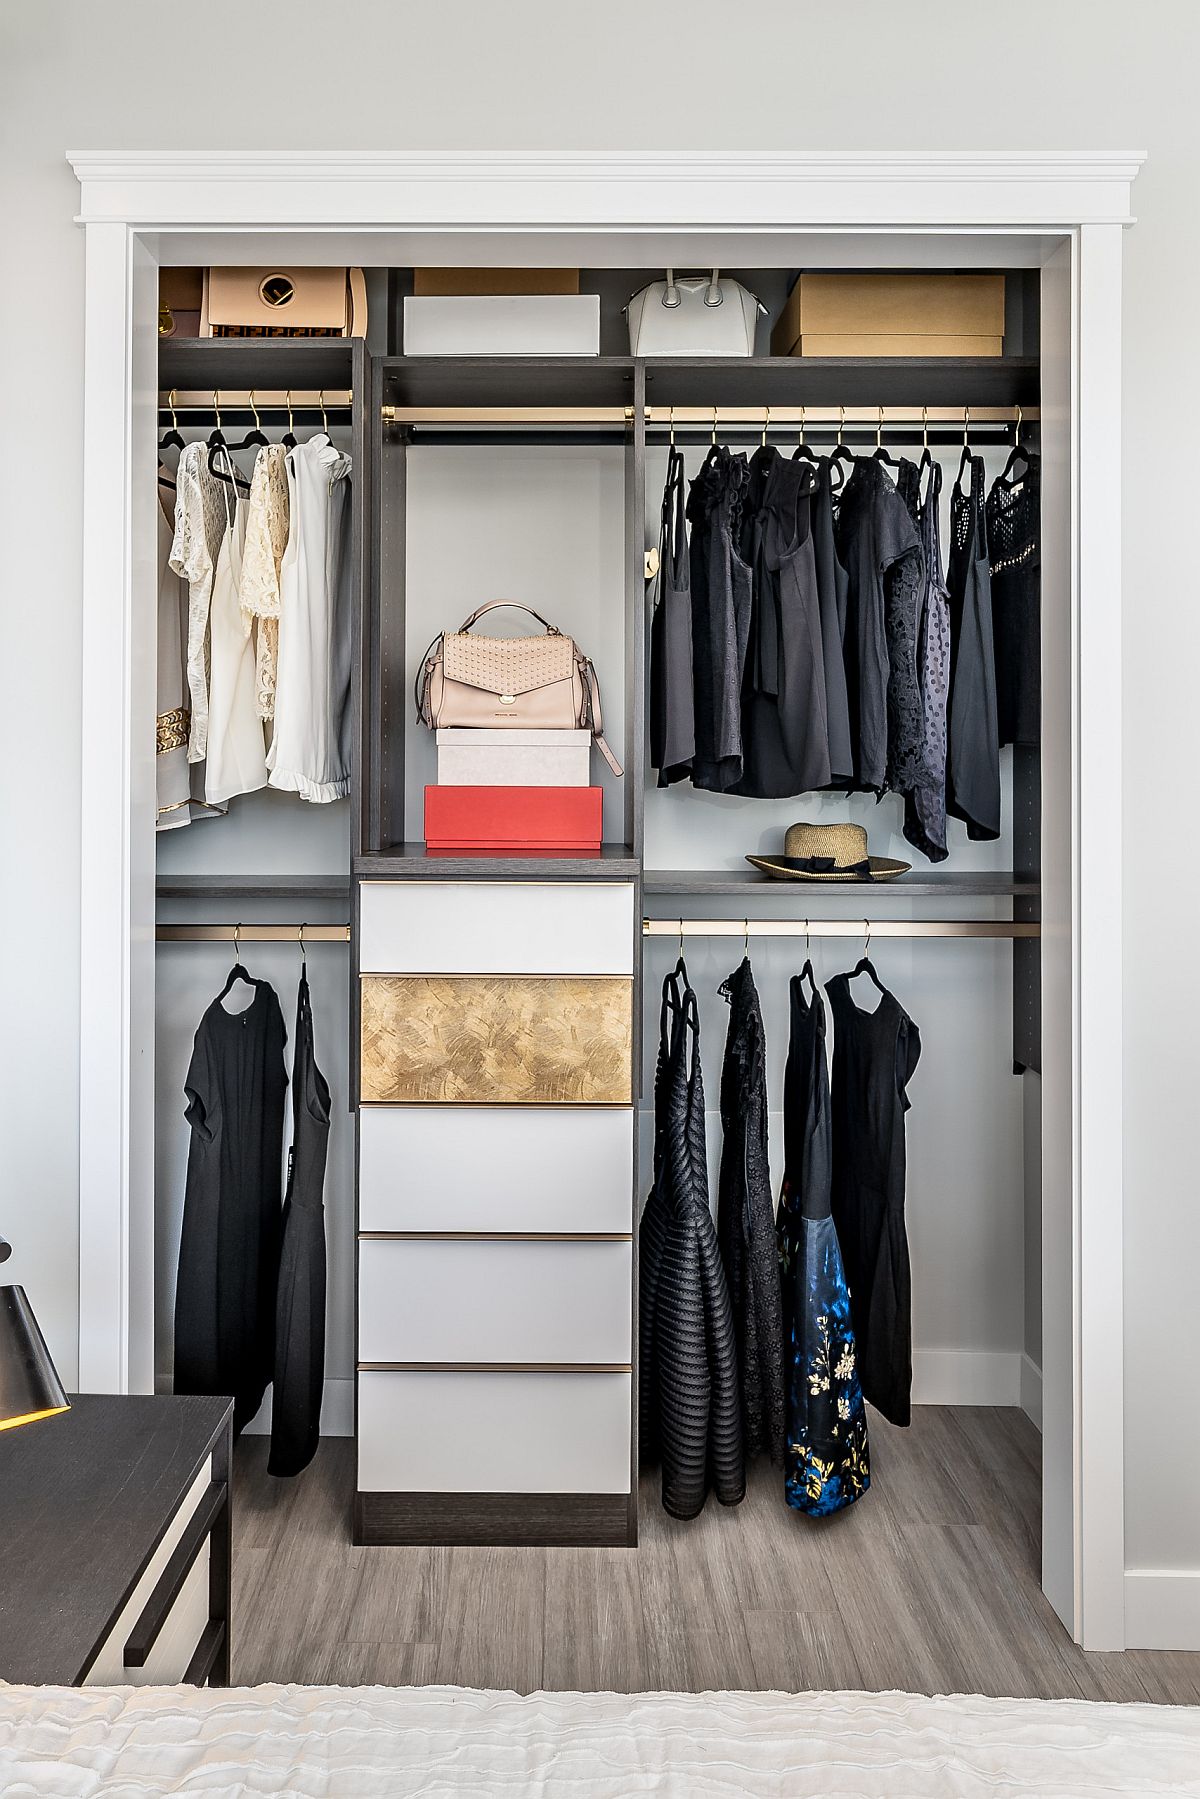 Modern-minimal-bedroom-closet-is-easy-on-the-eyes-thanks-to-smart-organization-82448